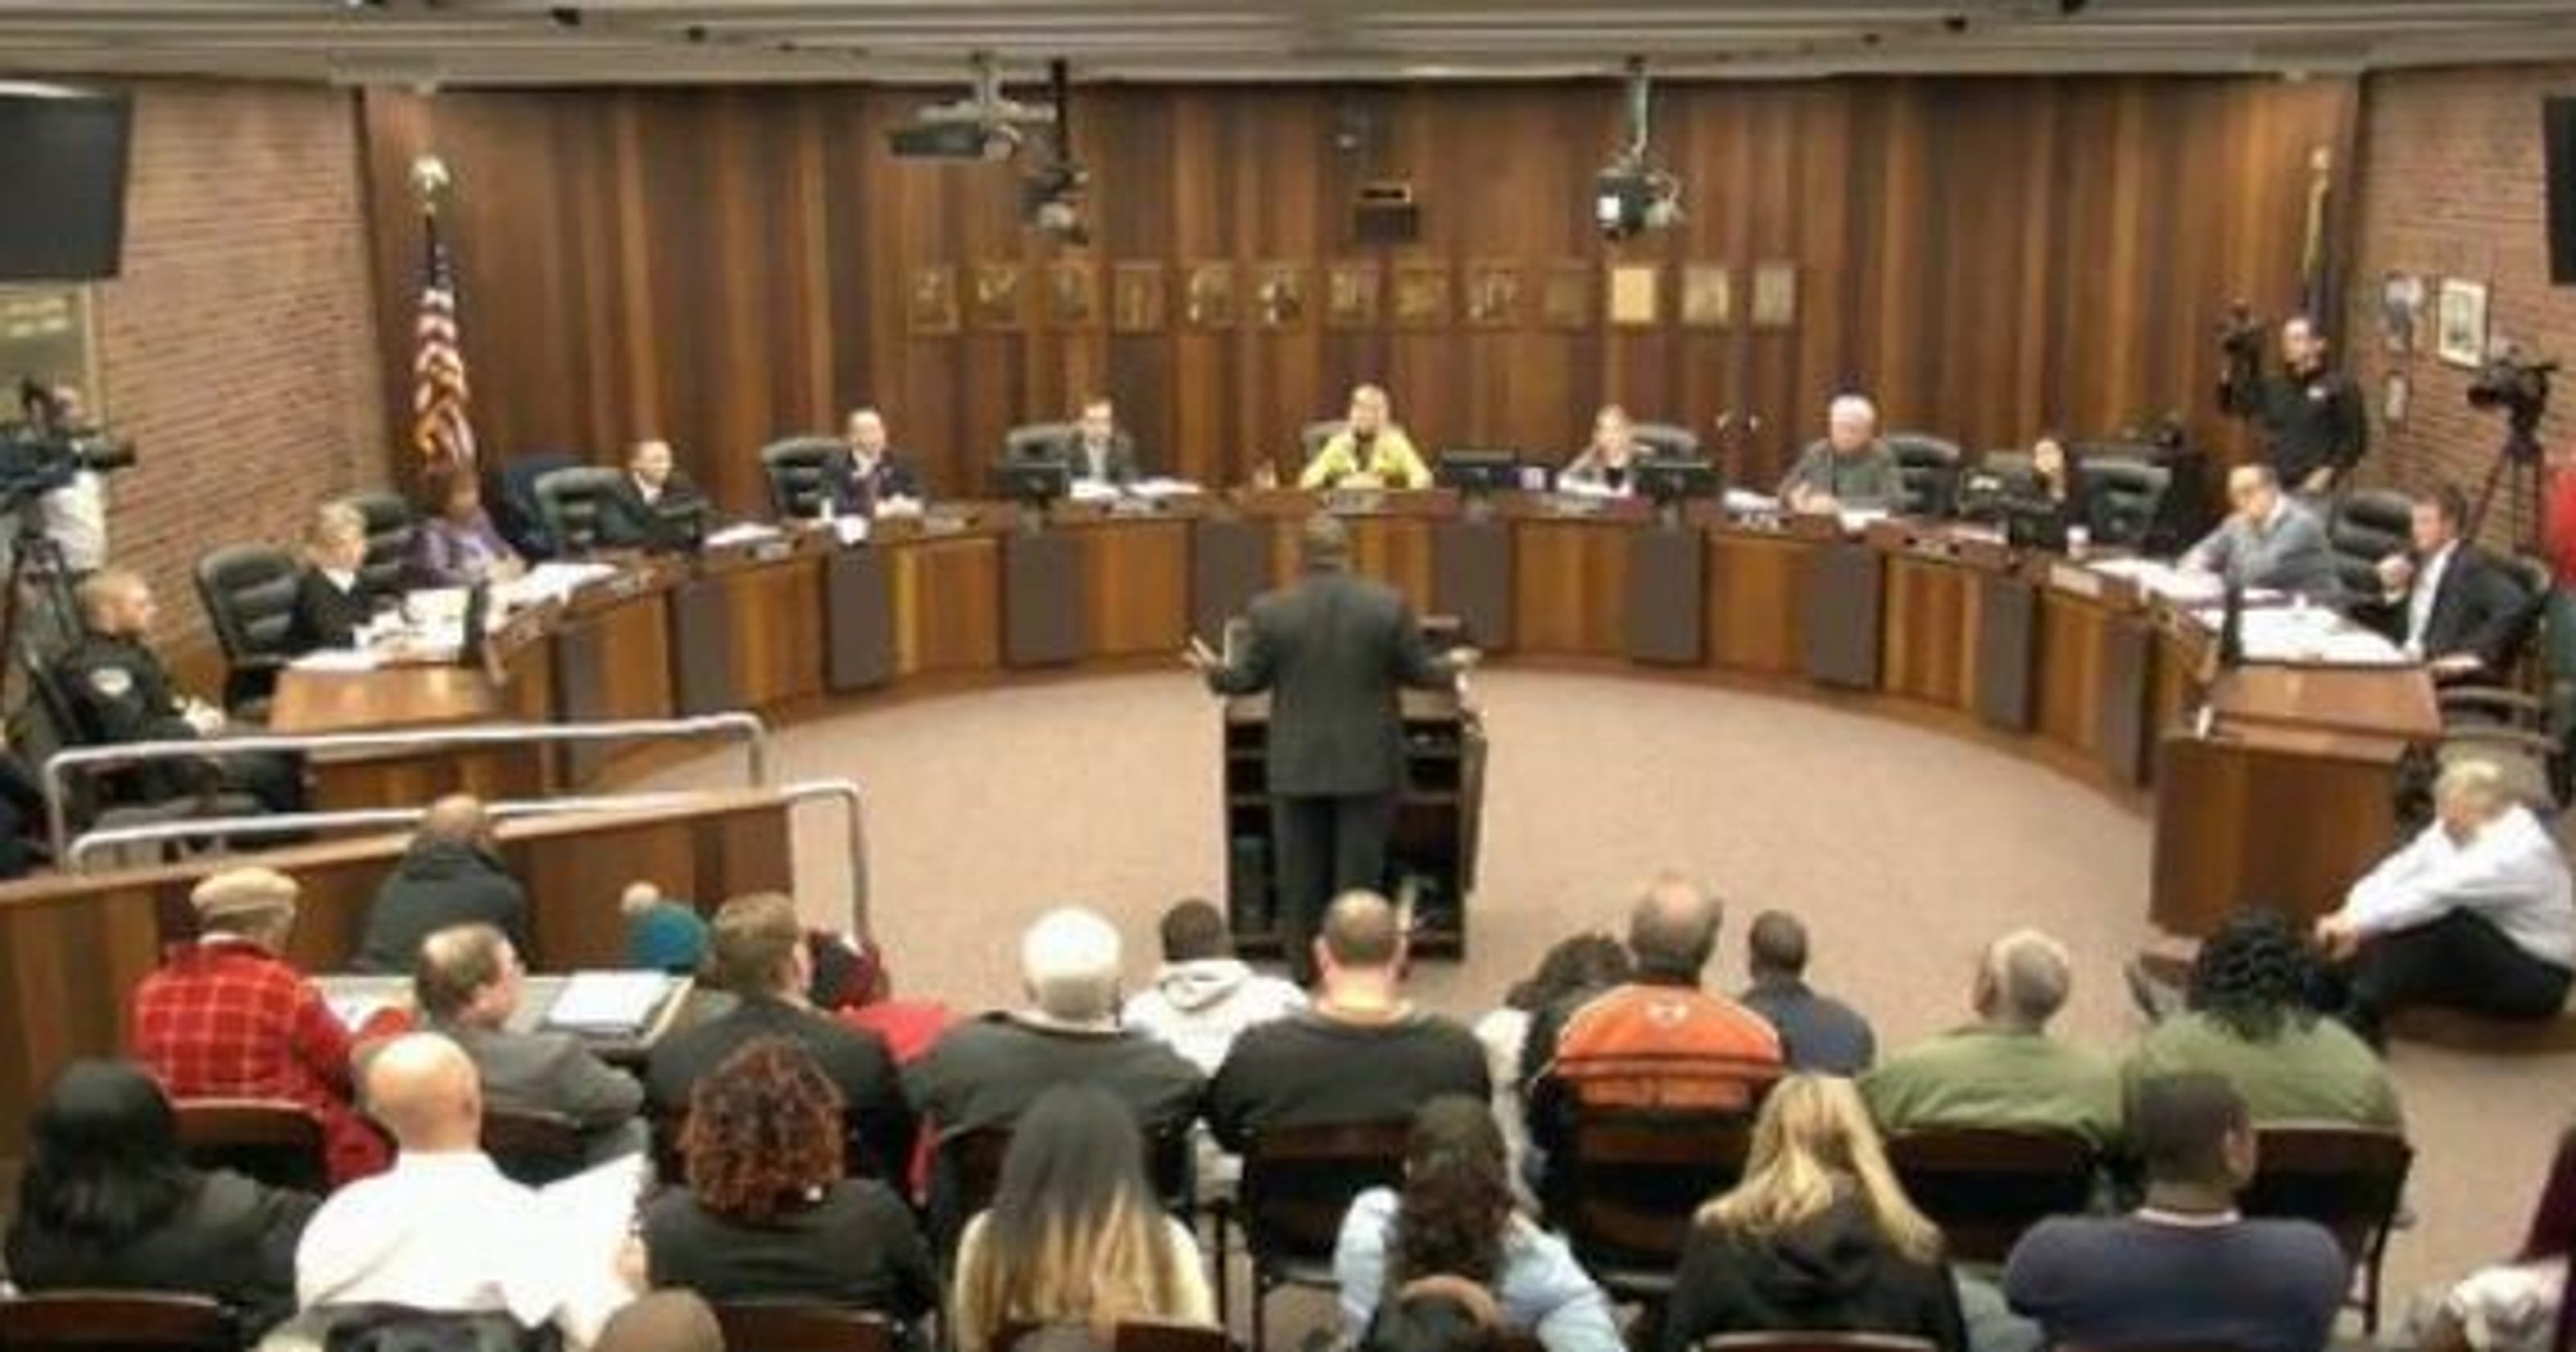 City Council approves changes to meeting style, public comment